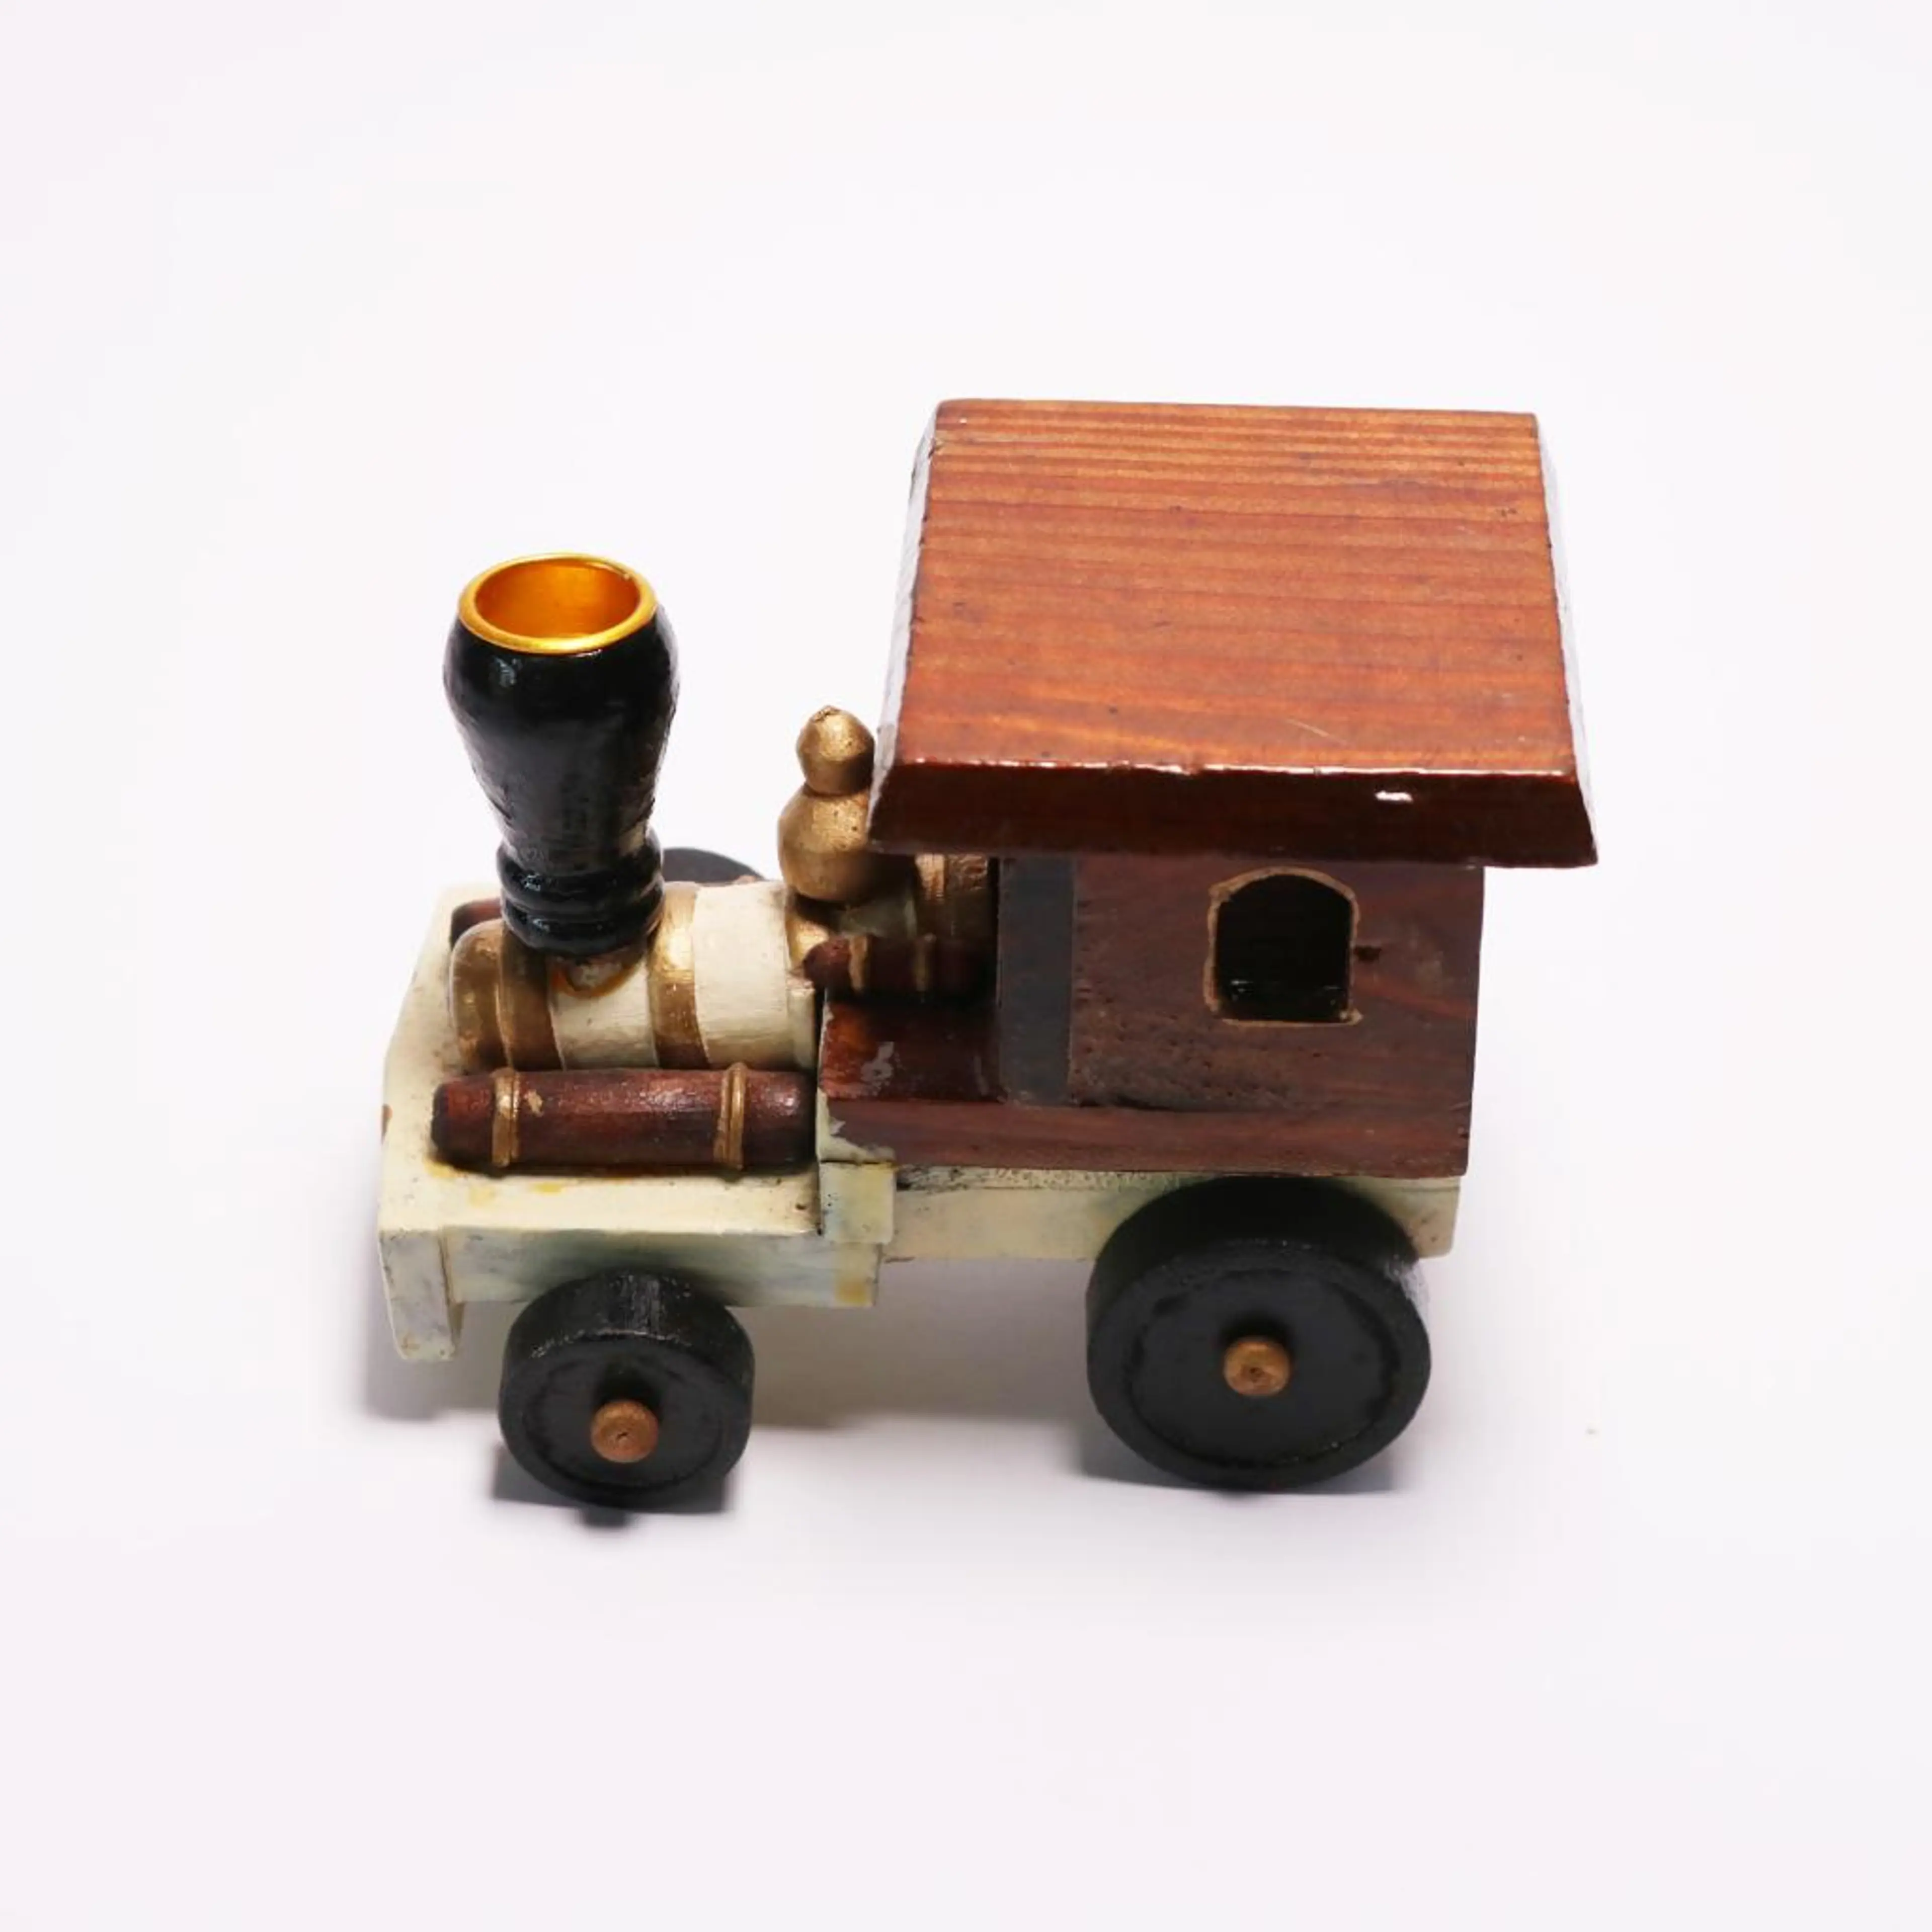 WOODEN CAR CANDLE HOLDER